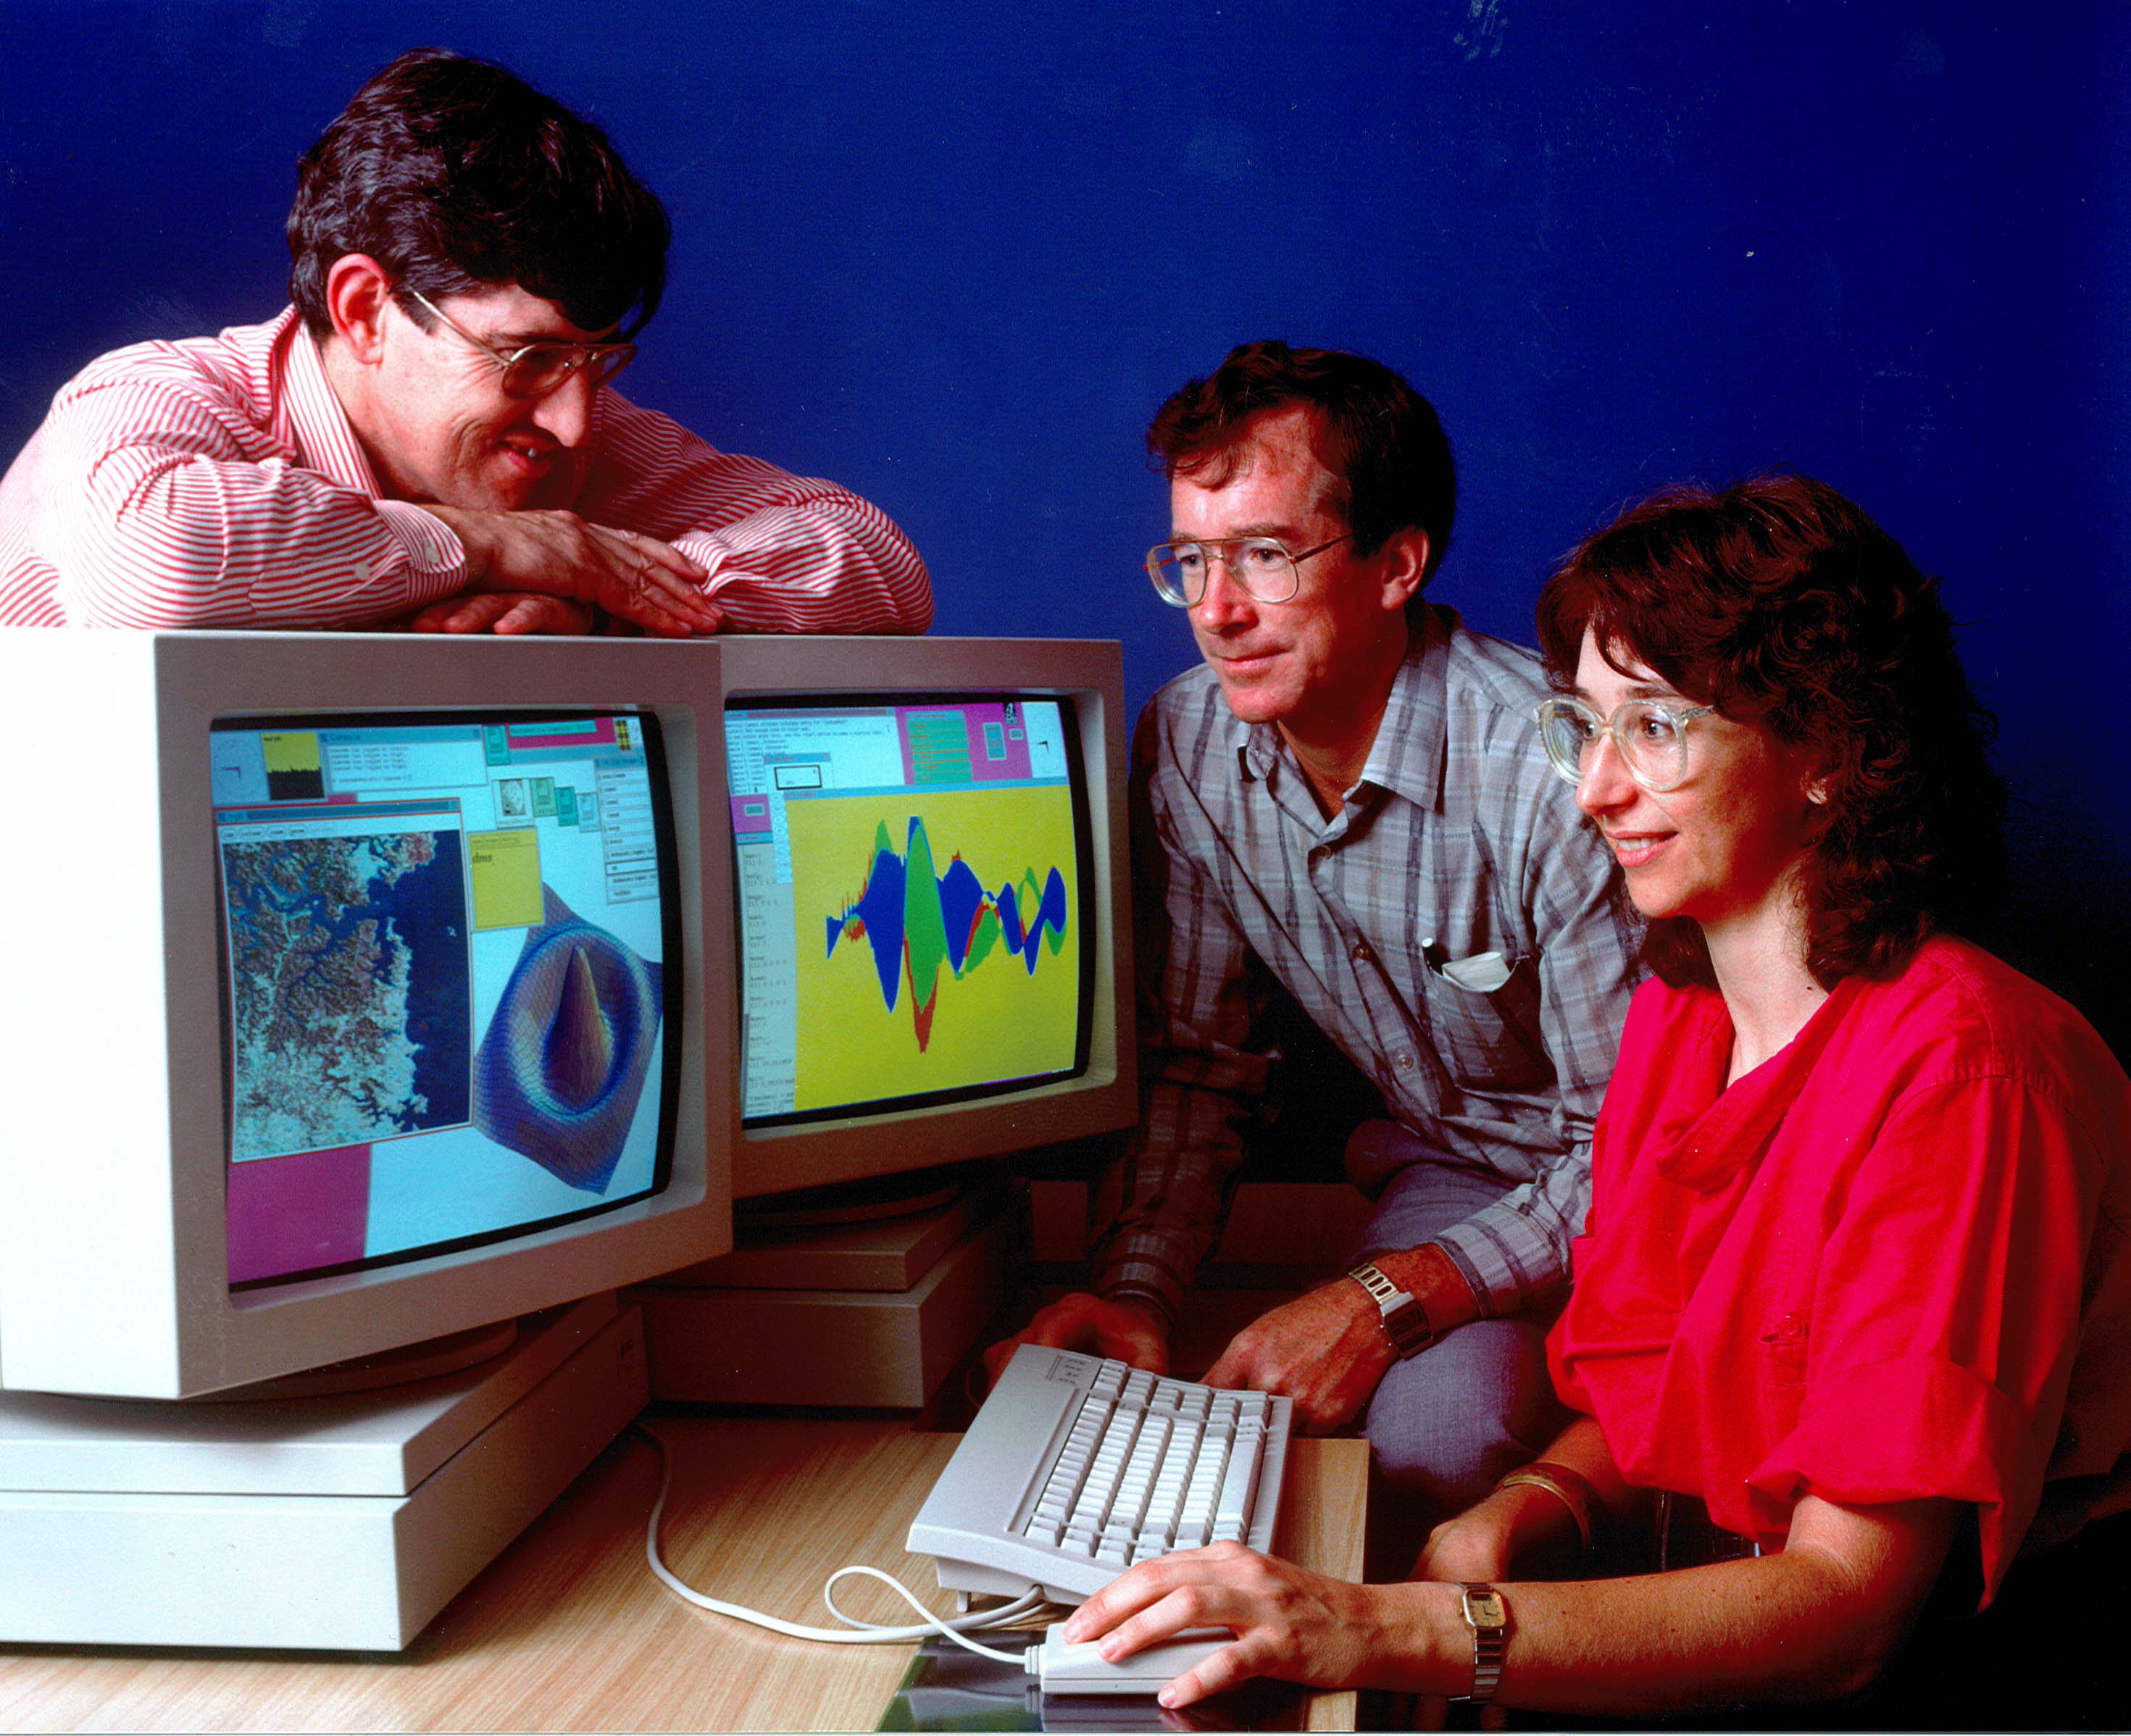 A blast from the past: Our stylish researchers from the Maths and Information Sciences team back in the 80s. Image: Computer Weekly.